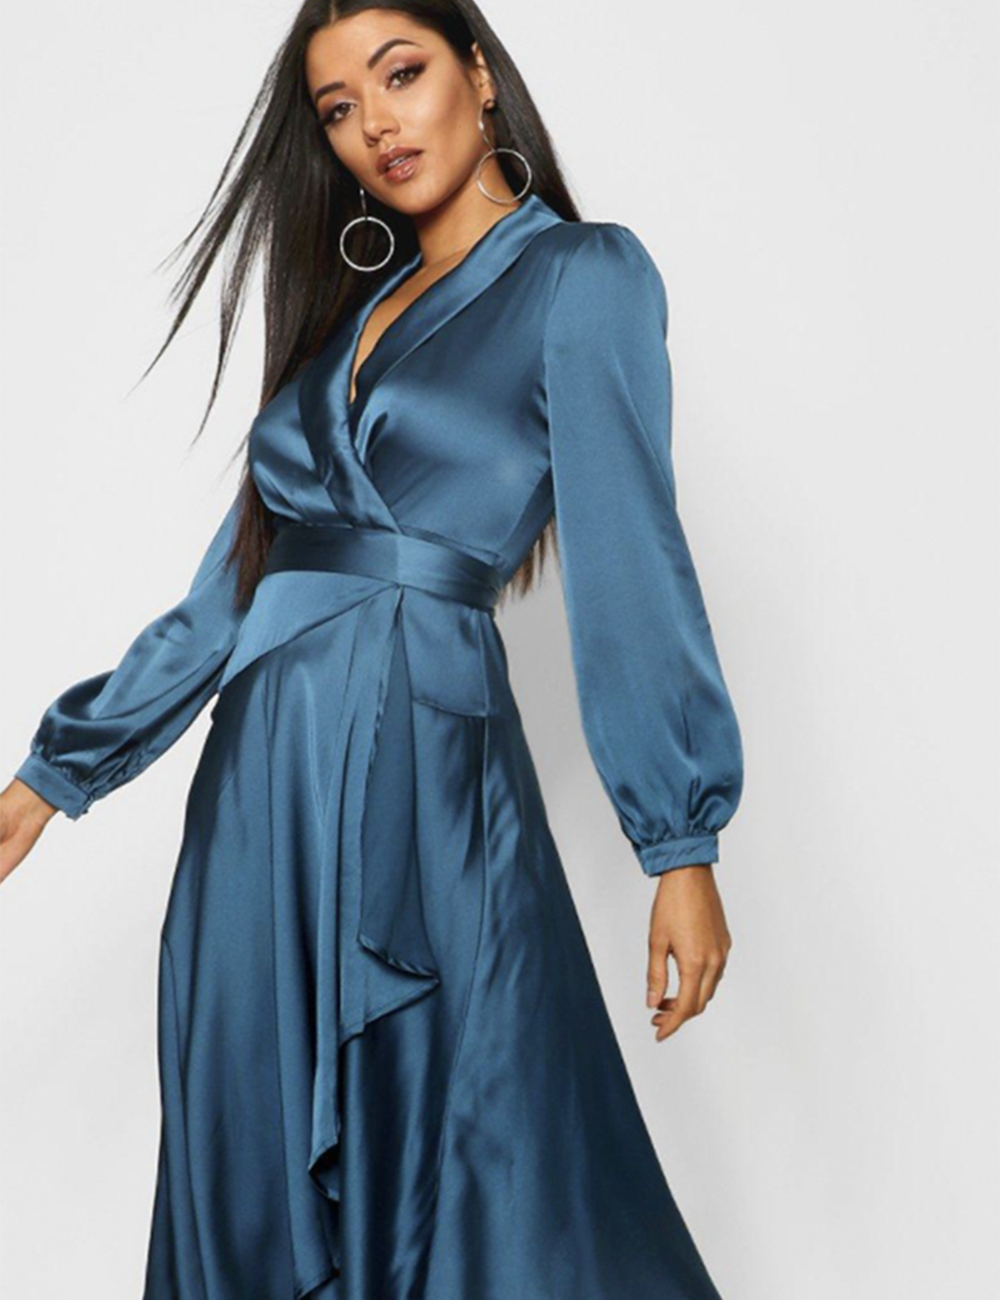 5 Dream Party Dresses For Fall From Boohoo Under $ 27 - ExBulletin